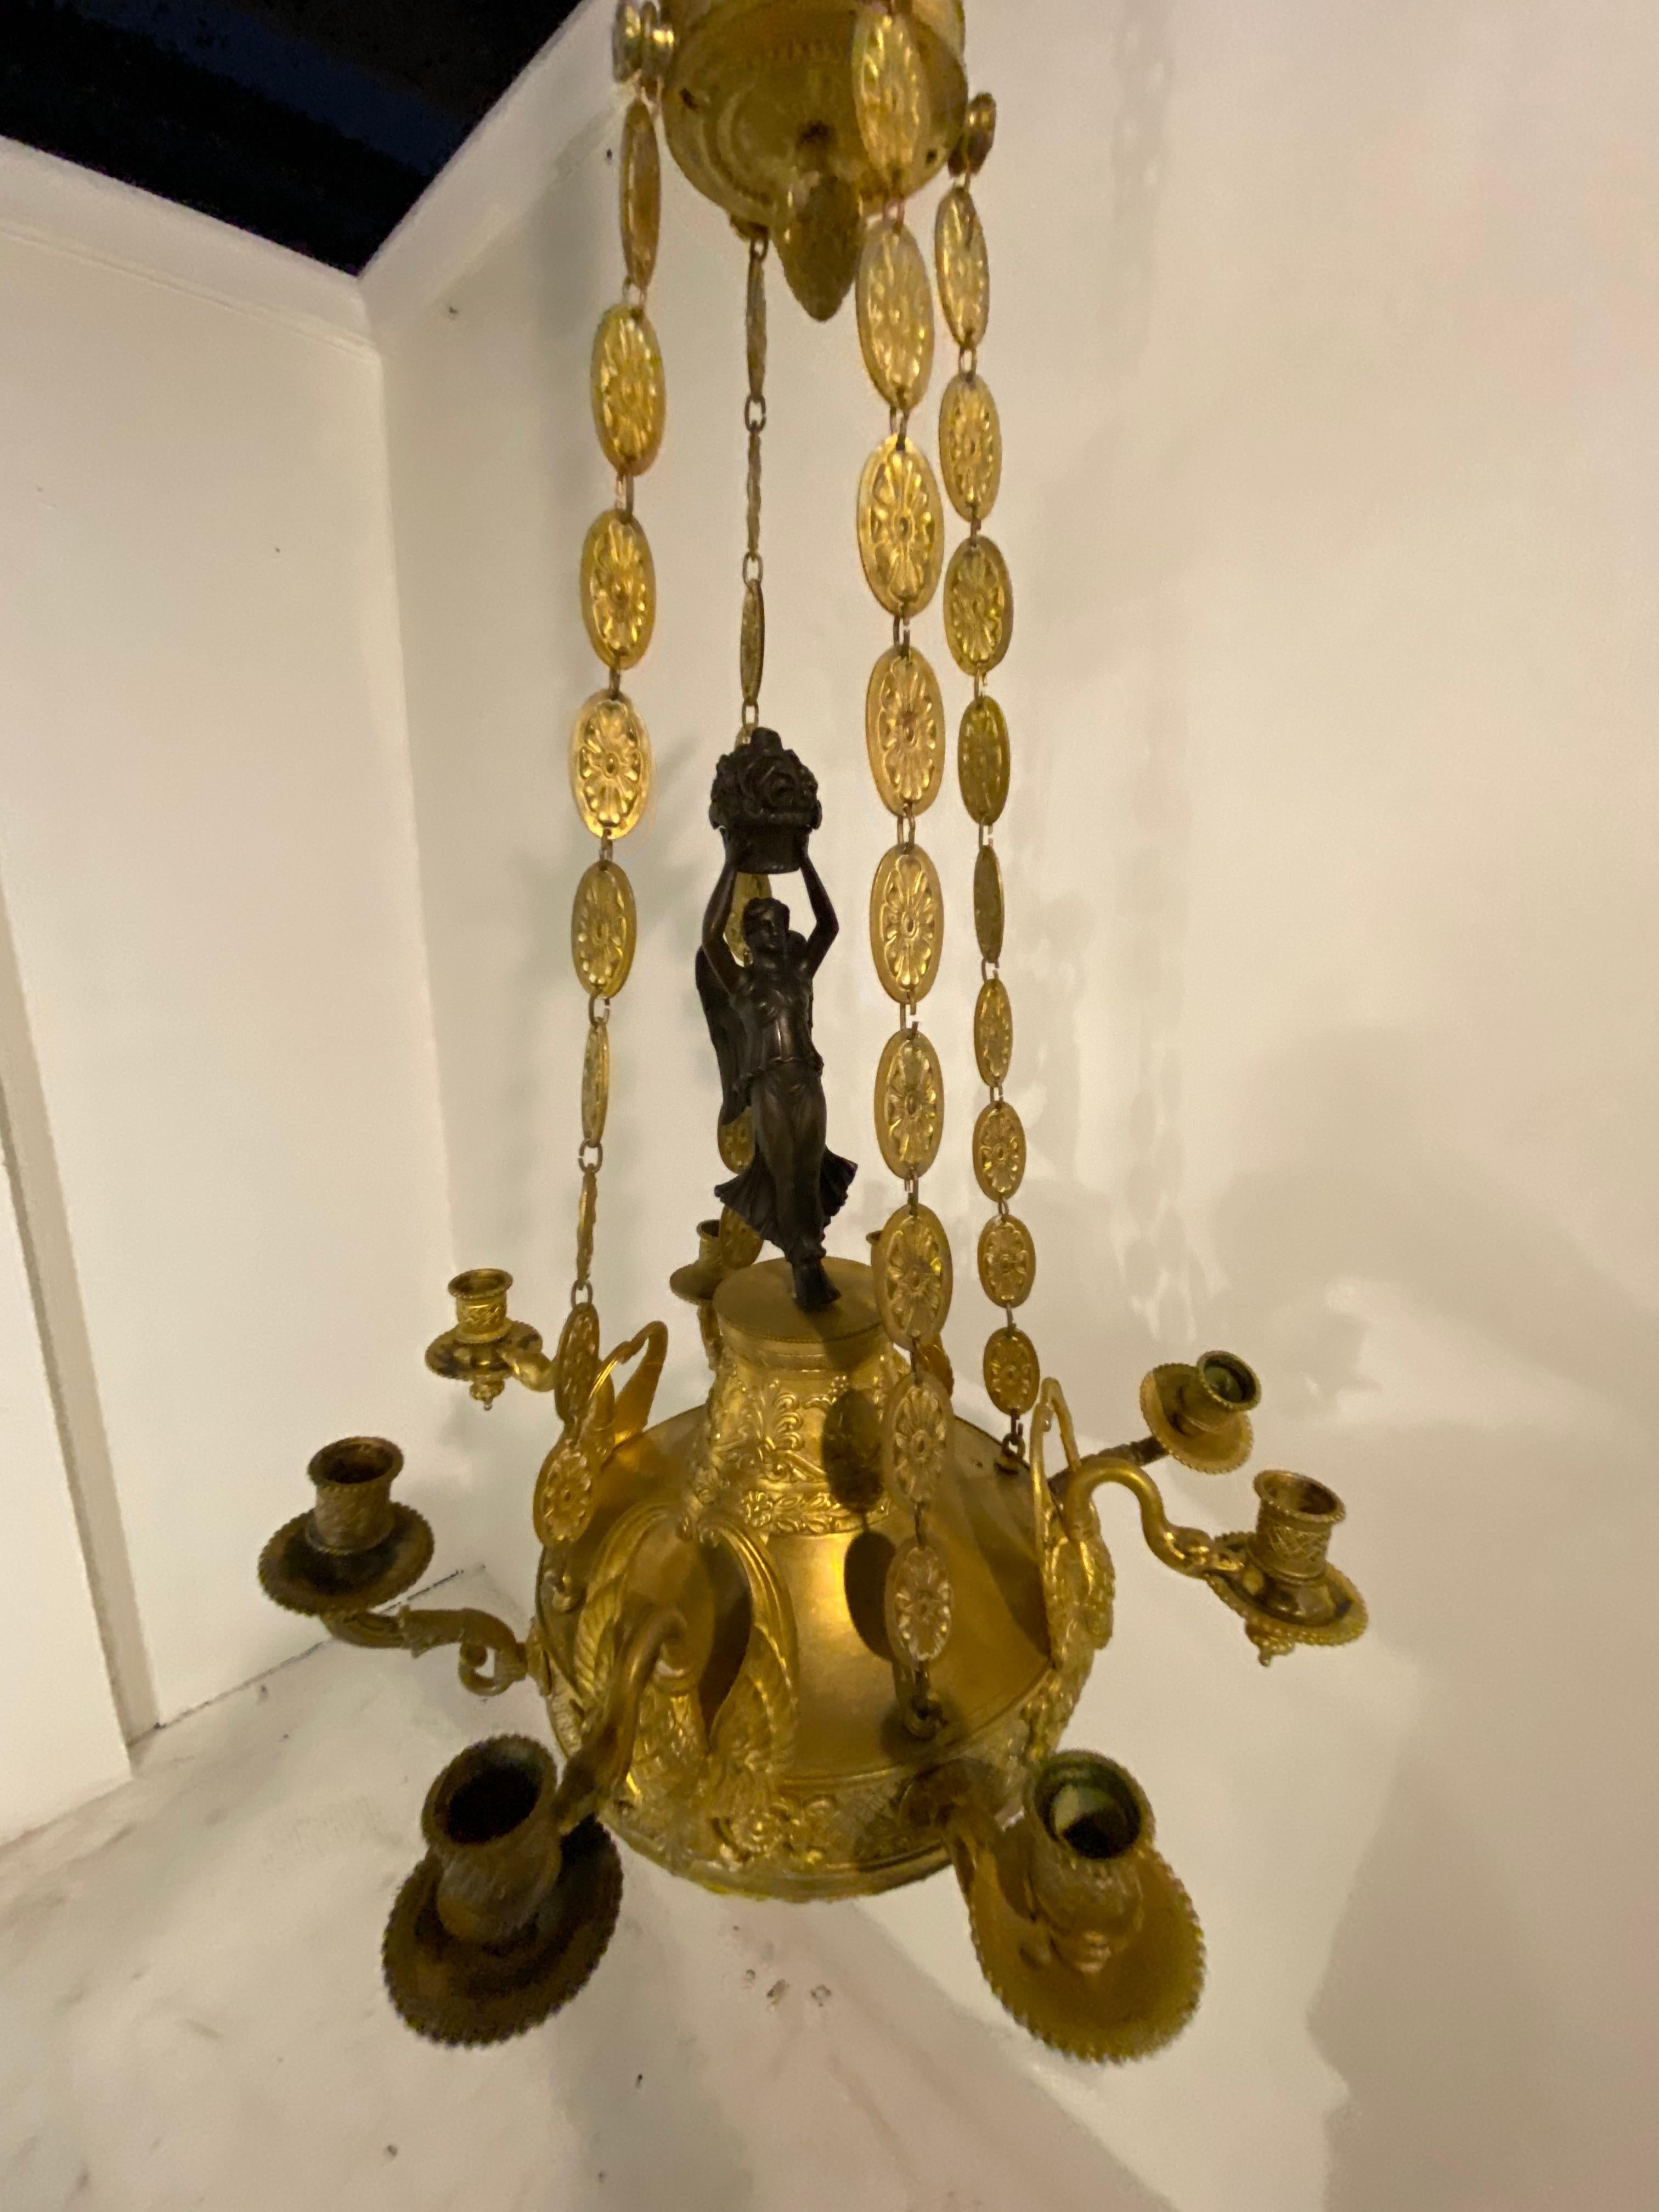 a late 19th Century French Empire chandelier with swam head's. Original finish and patina.